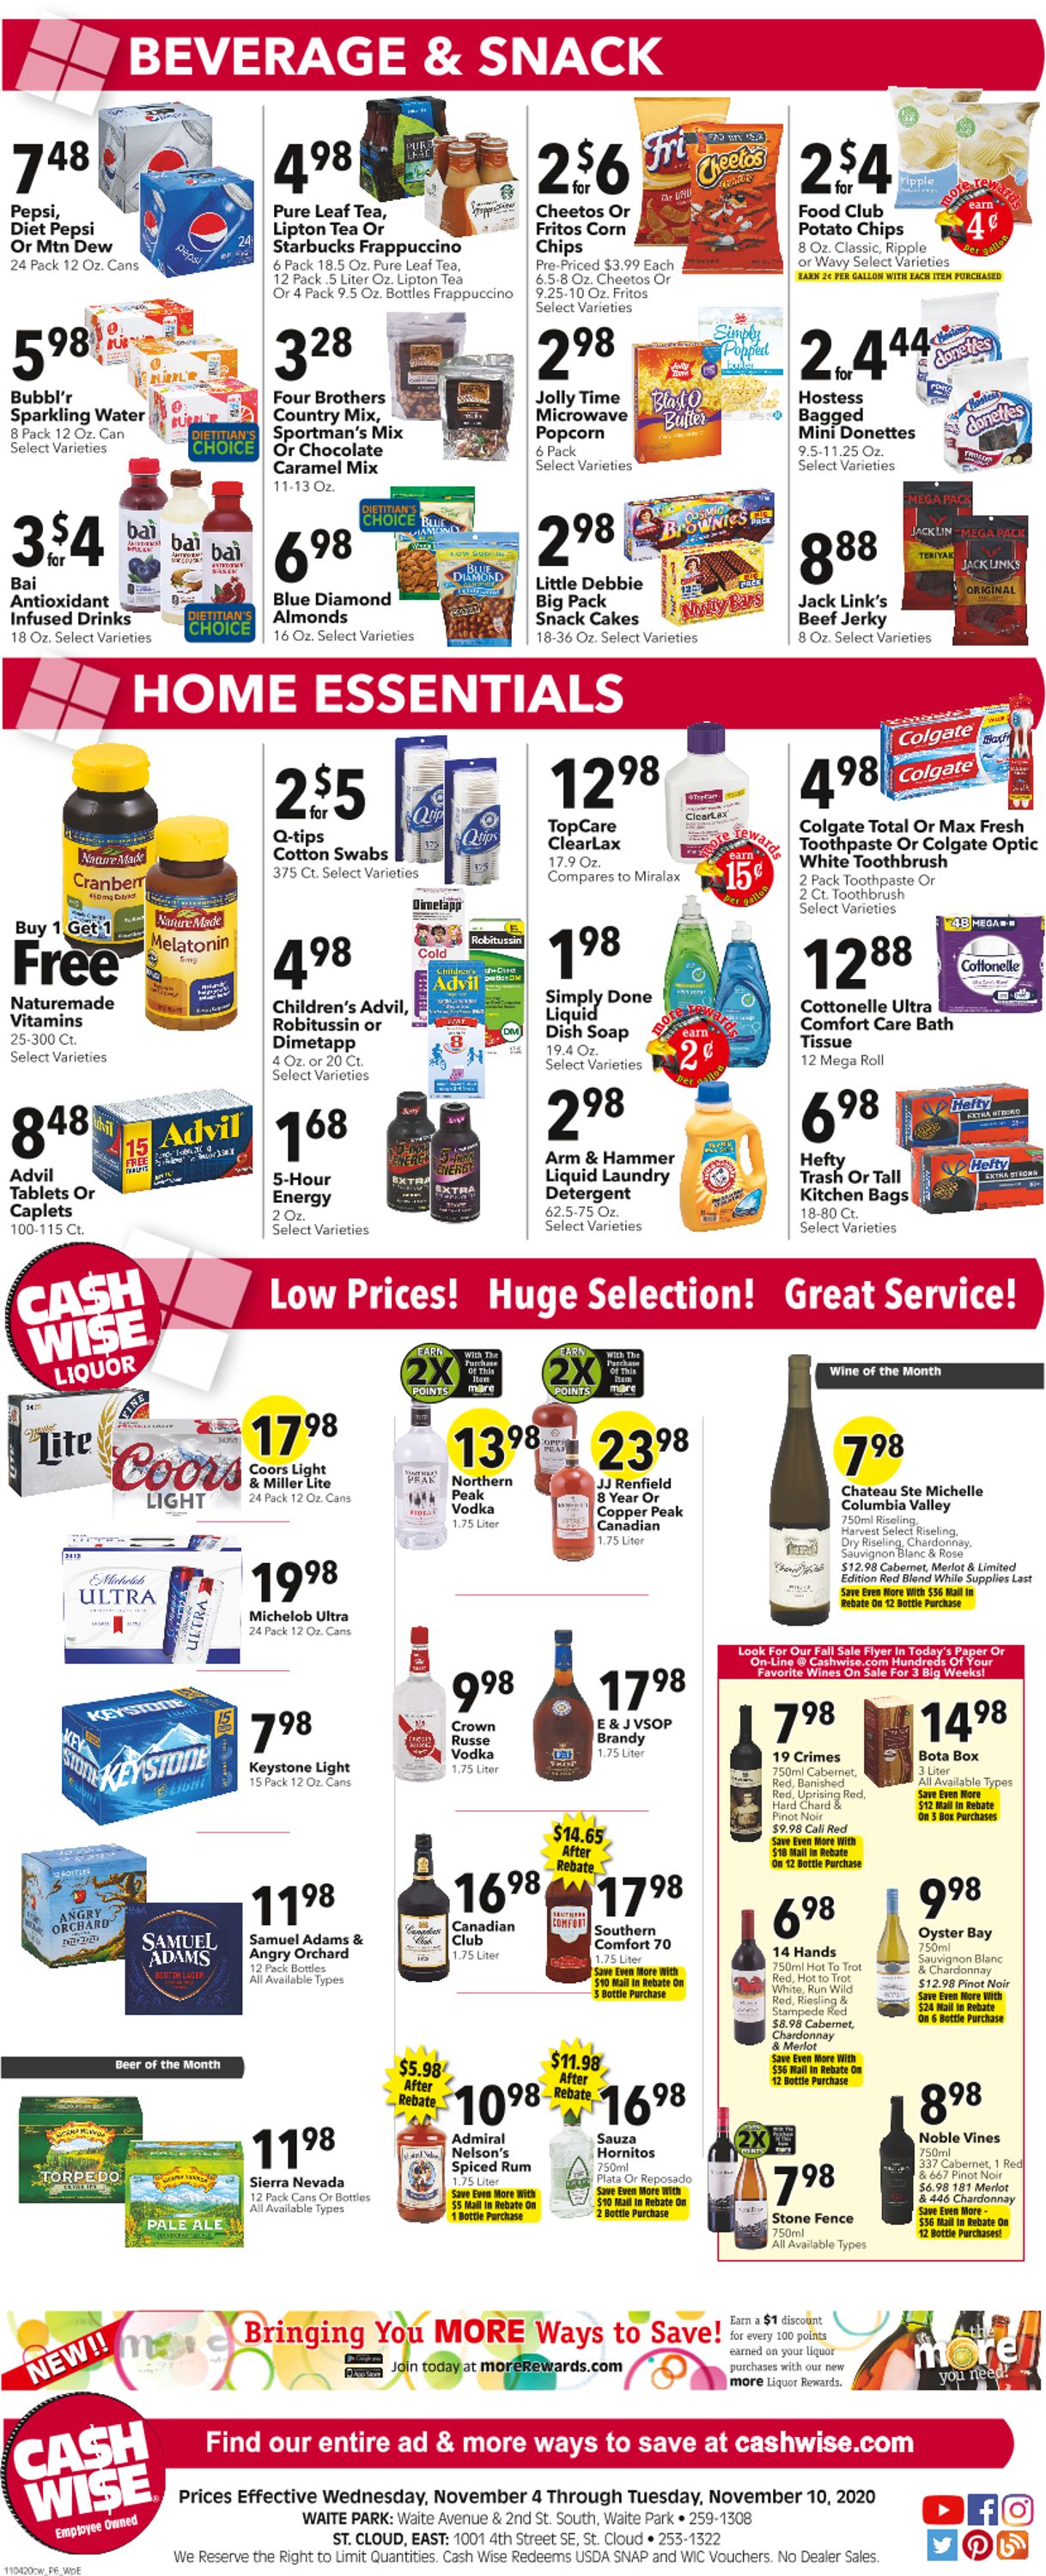 Cash Wise Weekly Ad Circular - valid 11/04-11/10/2020 (Page 6)